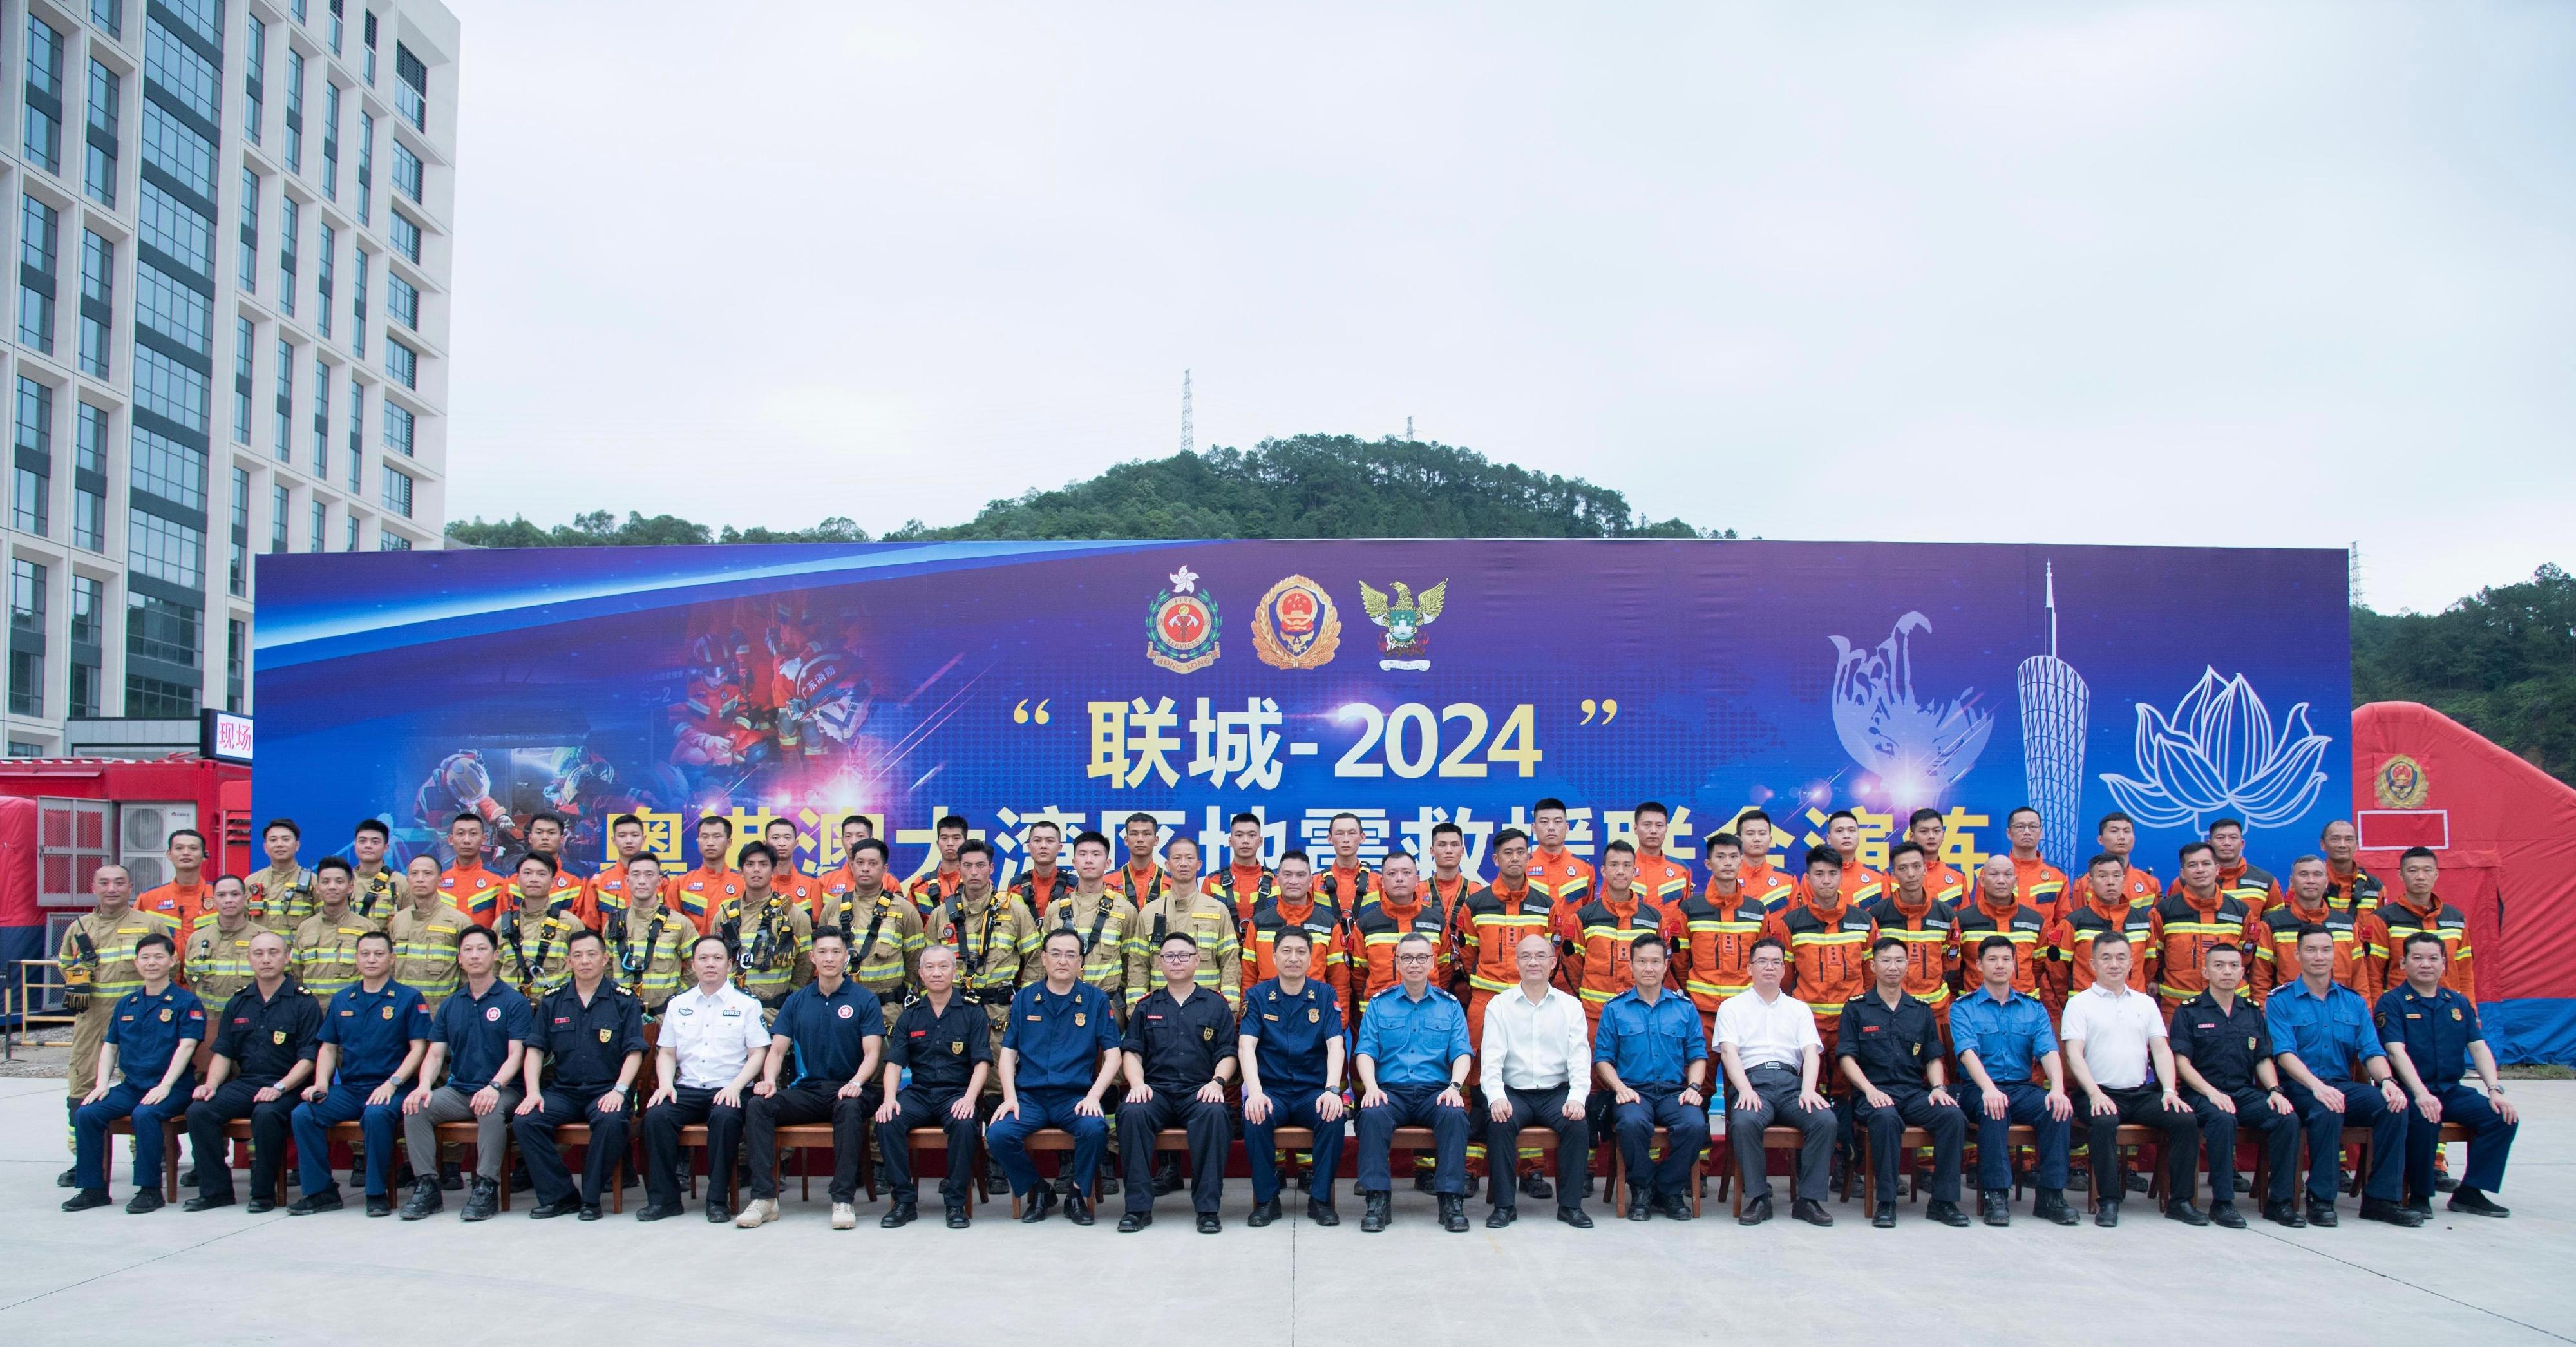 The Fire and Rescue Corps of Guangdong Province, the Hong Kong Fire Services Department and the Macao Fire Services Bureau have conducted the Guangdong-Hong Kong-Macao Greater Bay Area joint emergency response and rescue exercise "Liancheng-2024" in Jiangmen, Guangdong Province from May 27 to today (May 29). Photo shows the Commander of the Guangdong Fire and Rescue Brigade, Mr Zhang Mingcan (first row, centre); the Deputy Director of Fire Services (Operations), Mr Angus Wong (first row, tenth right); and the Deputy Commissioner of the Fire Services Bureau of Macao, Mr Lam Chon Sang (first row, tenth left), together with rescue teams from the three places.